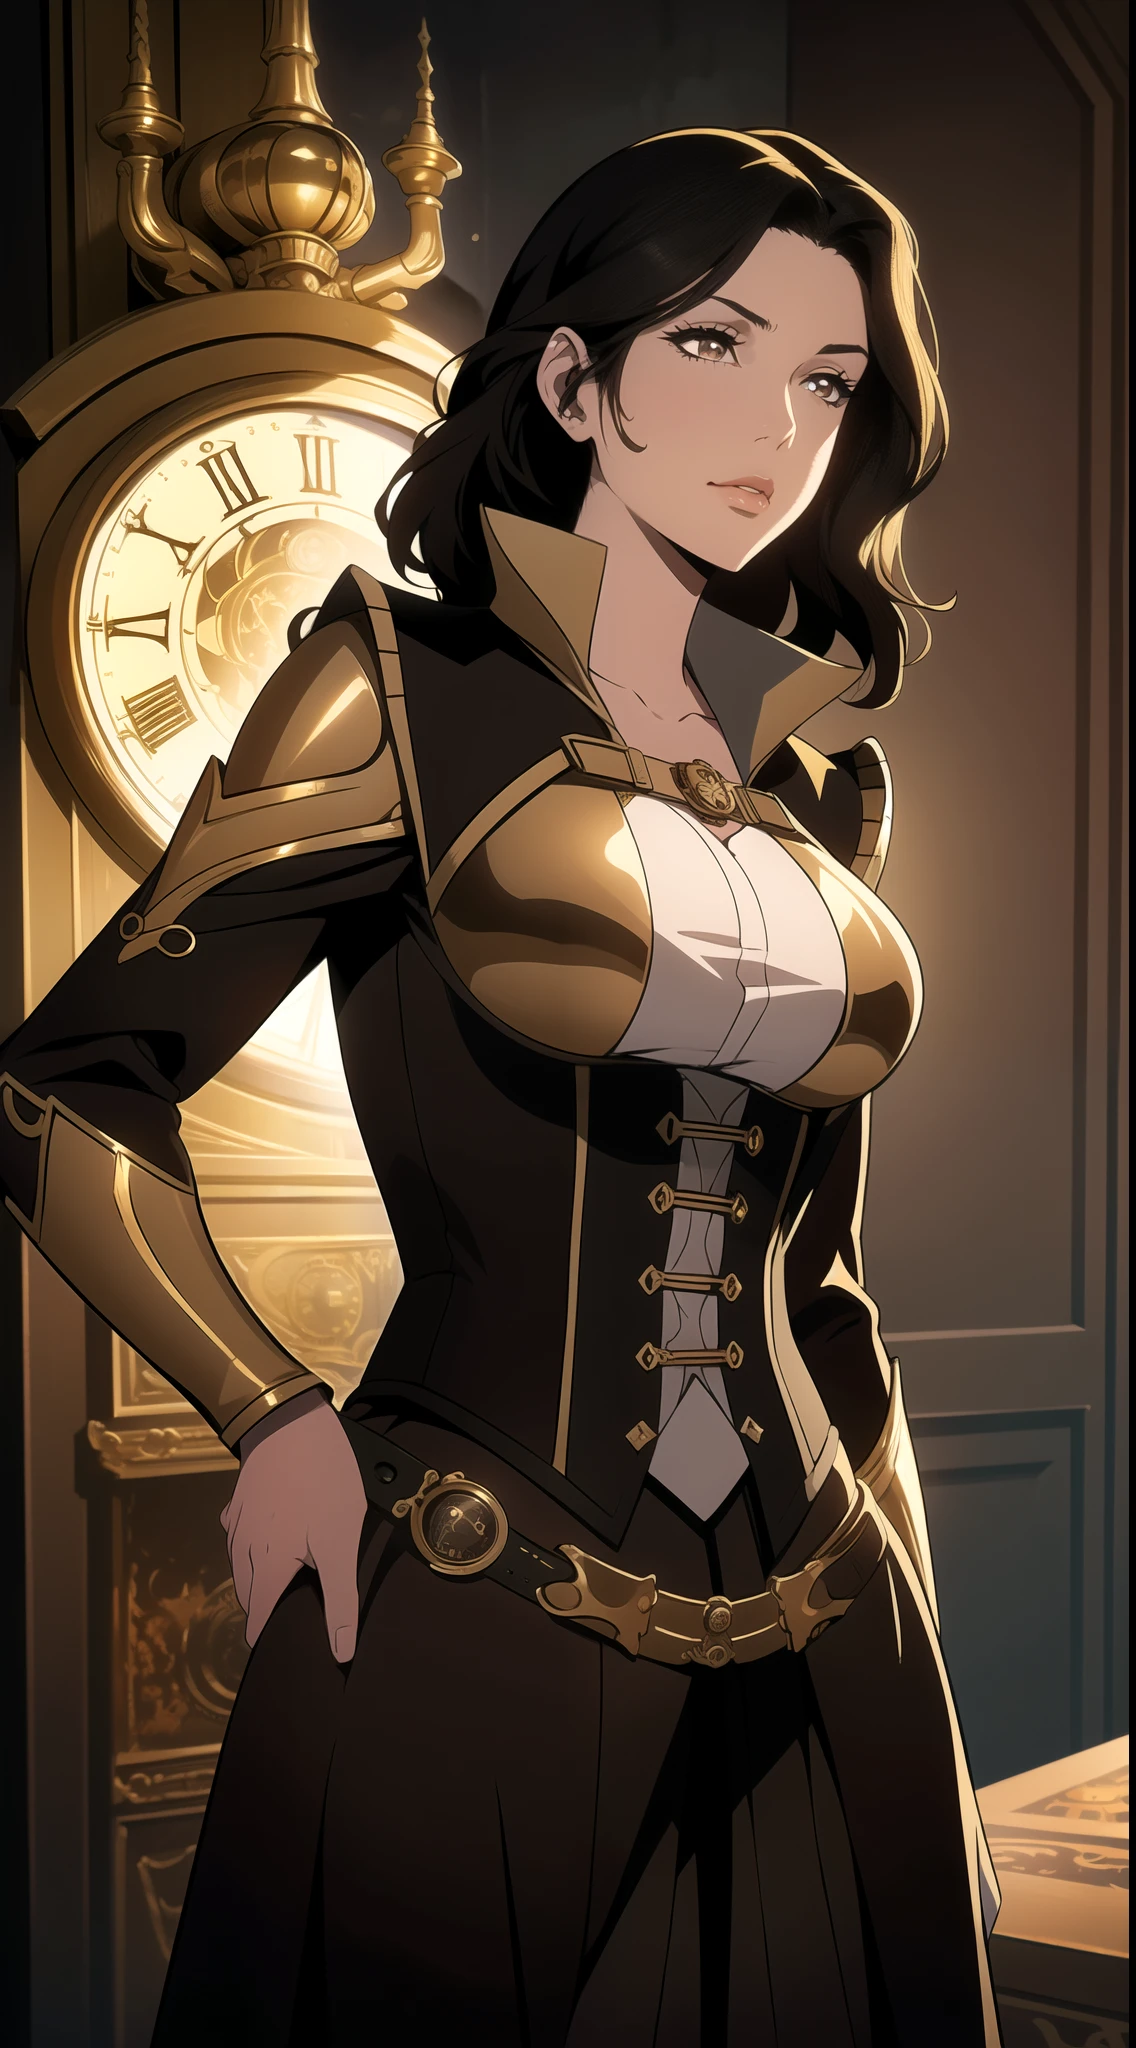 (One Person), (Masterpiece, Best Quality), (A Gorgeous 25 Years Old British Female Clock Mechanic), (Short Wavy Black Hair), (Golden Brown Eyes), (Fair Skin), (Wearing Brown and Gold Steampunk-style Outfit with Goggles and Corsets, with Ornate Golden Gears and Clocks), (Steampunk City Road at Day), (Dynamic Pose), Centered, (Half Body Shot:1.4), From Front Shot, Insane Details, Intricate Face Detail, Intricate Hand Details, Cinematic Shot and Lighting, Realistic and Vibrant Colors, Masterpiece, Sharp Focus, Highly Detailed, Taken with DSLR camera, Depth of Field, Realistic Environment and Scene, Master Composition and Cinematography